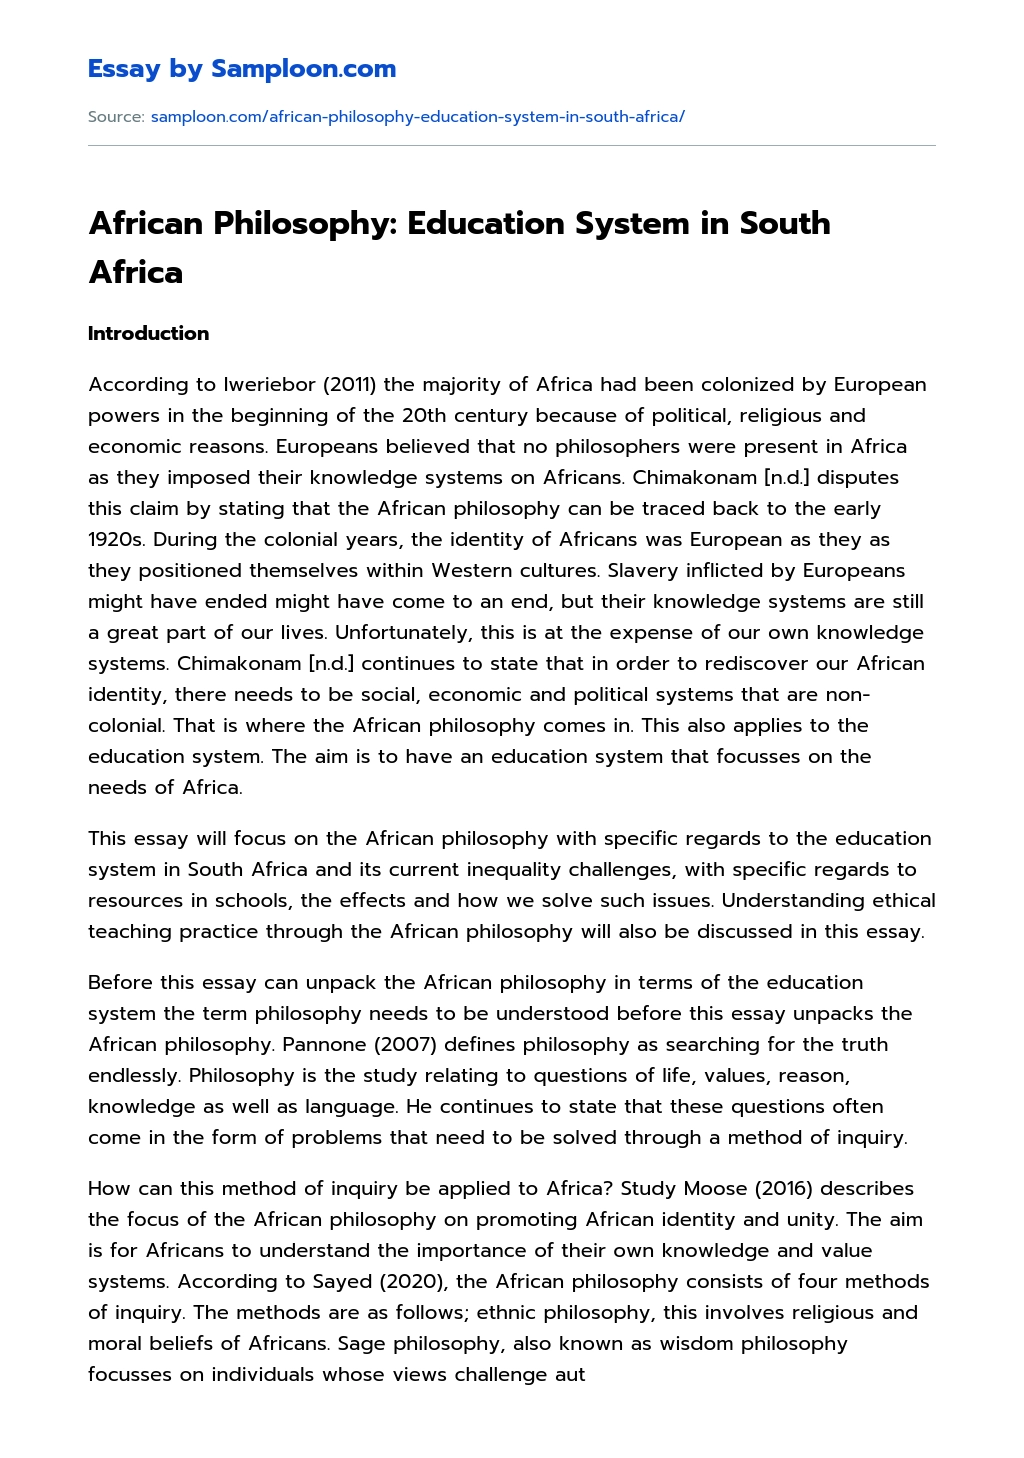 African Philosophy: Education System in South Africa Argumentative Essay essay